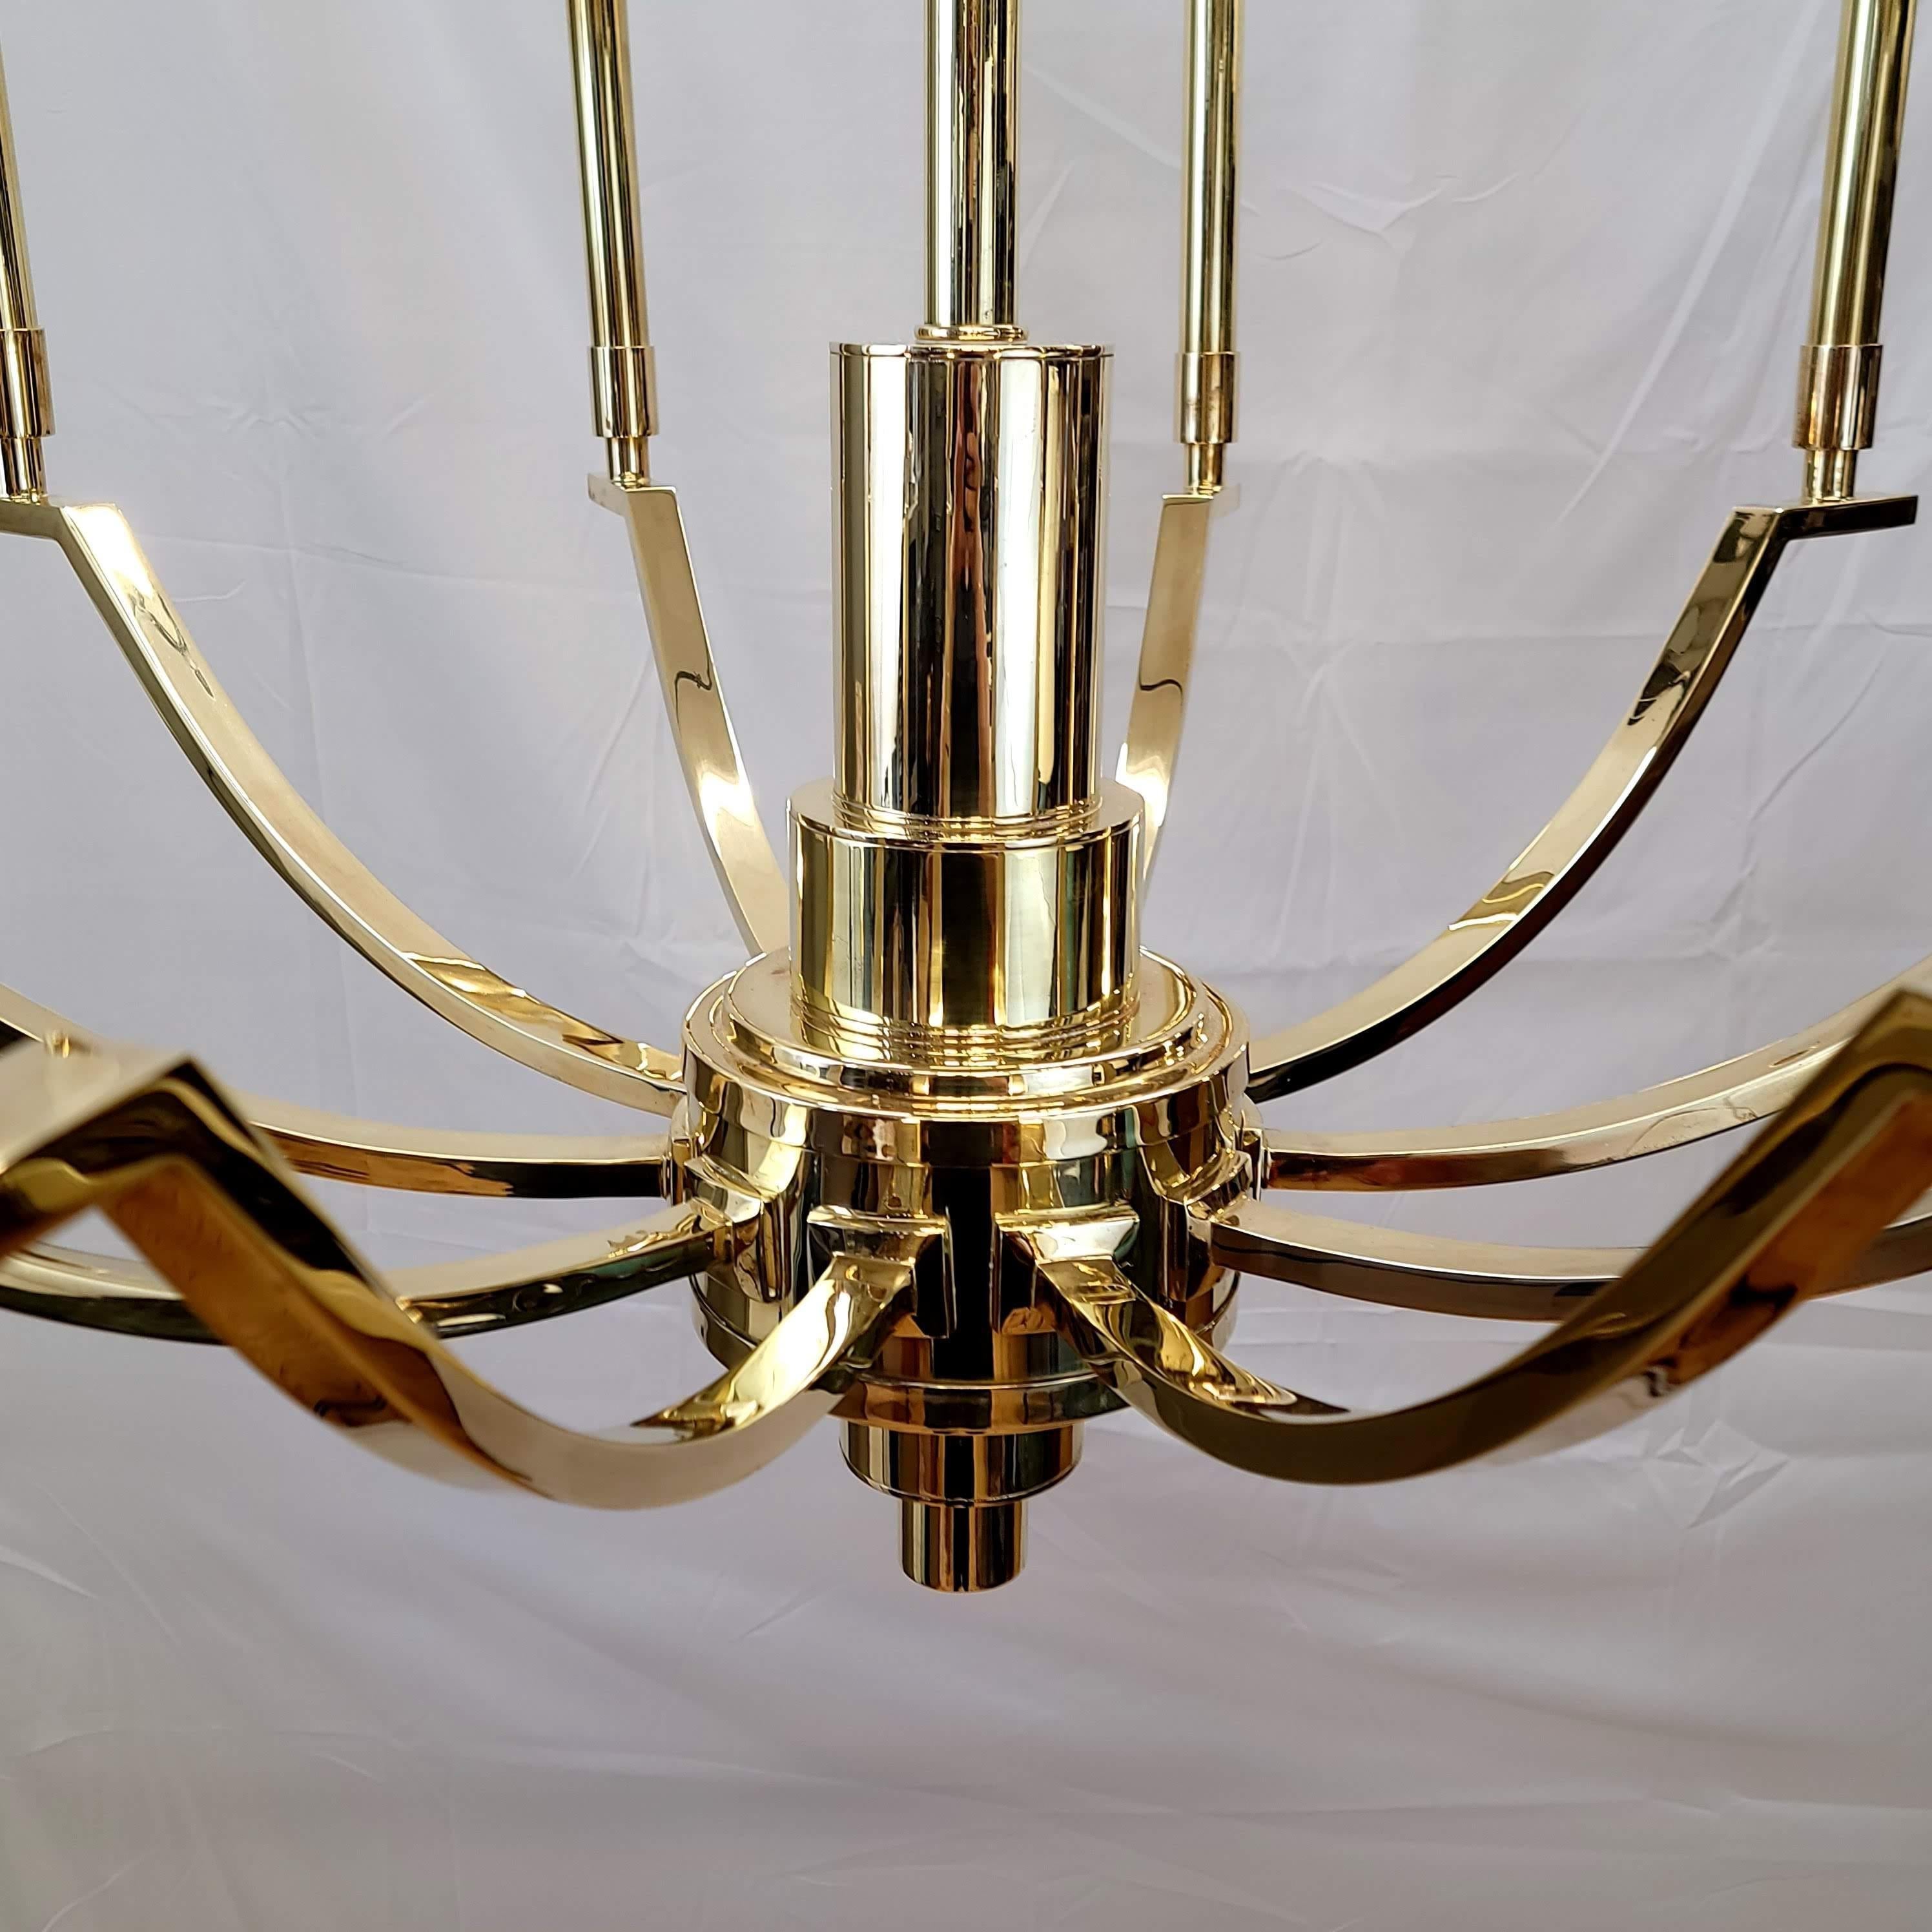 North American Majestic Mid-Century Modern Polished Brass Chandelier For Sale